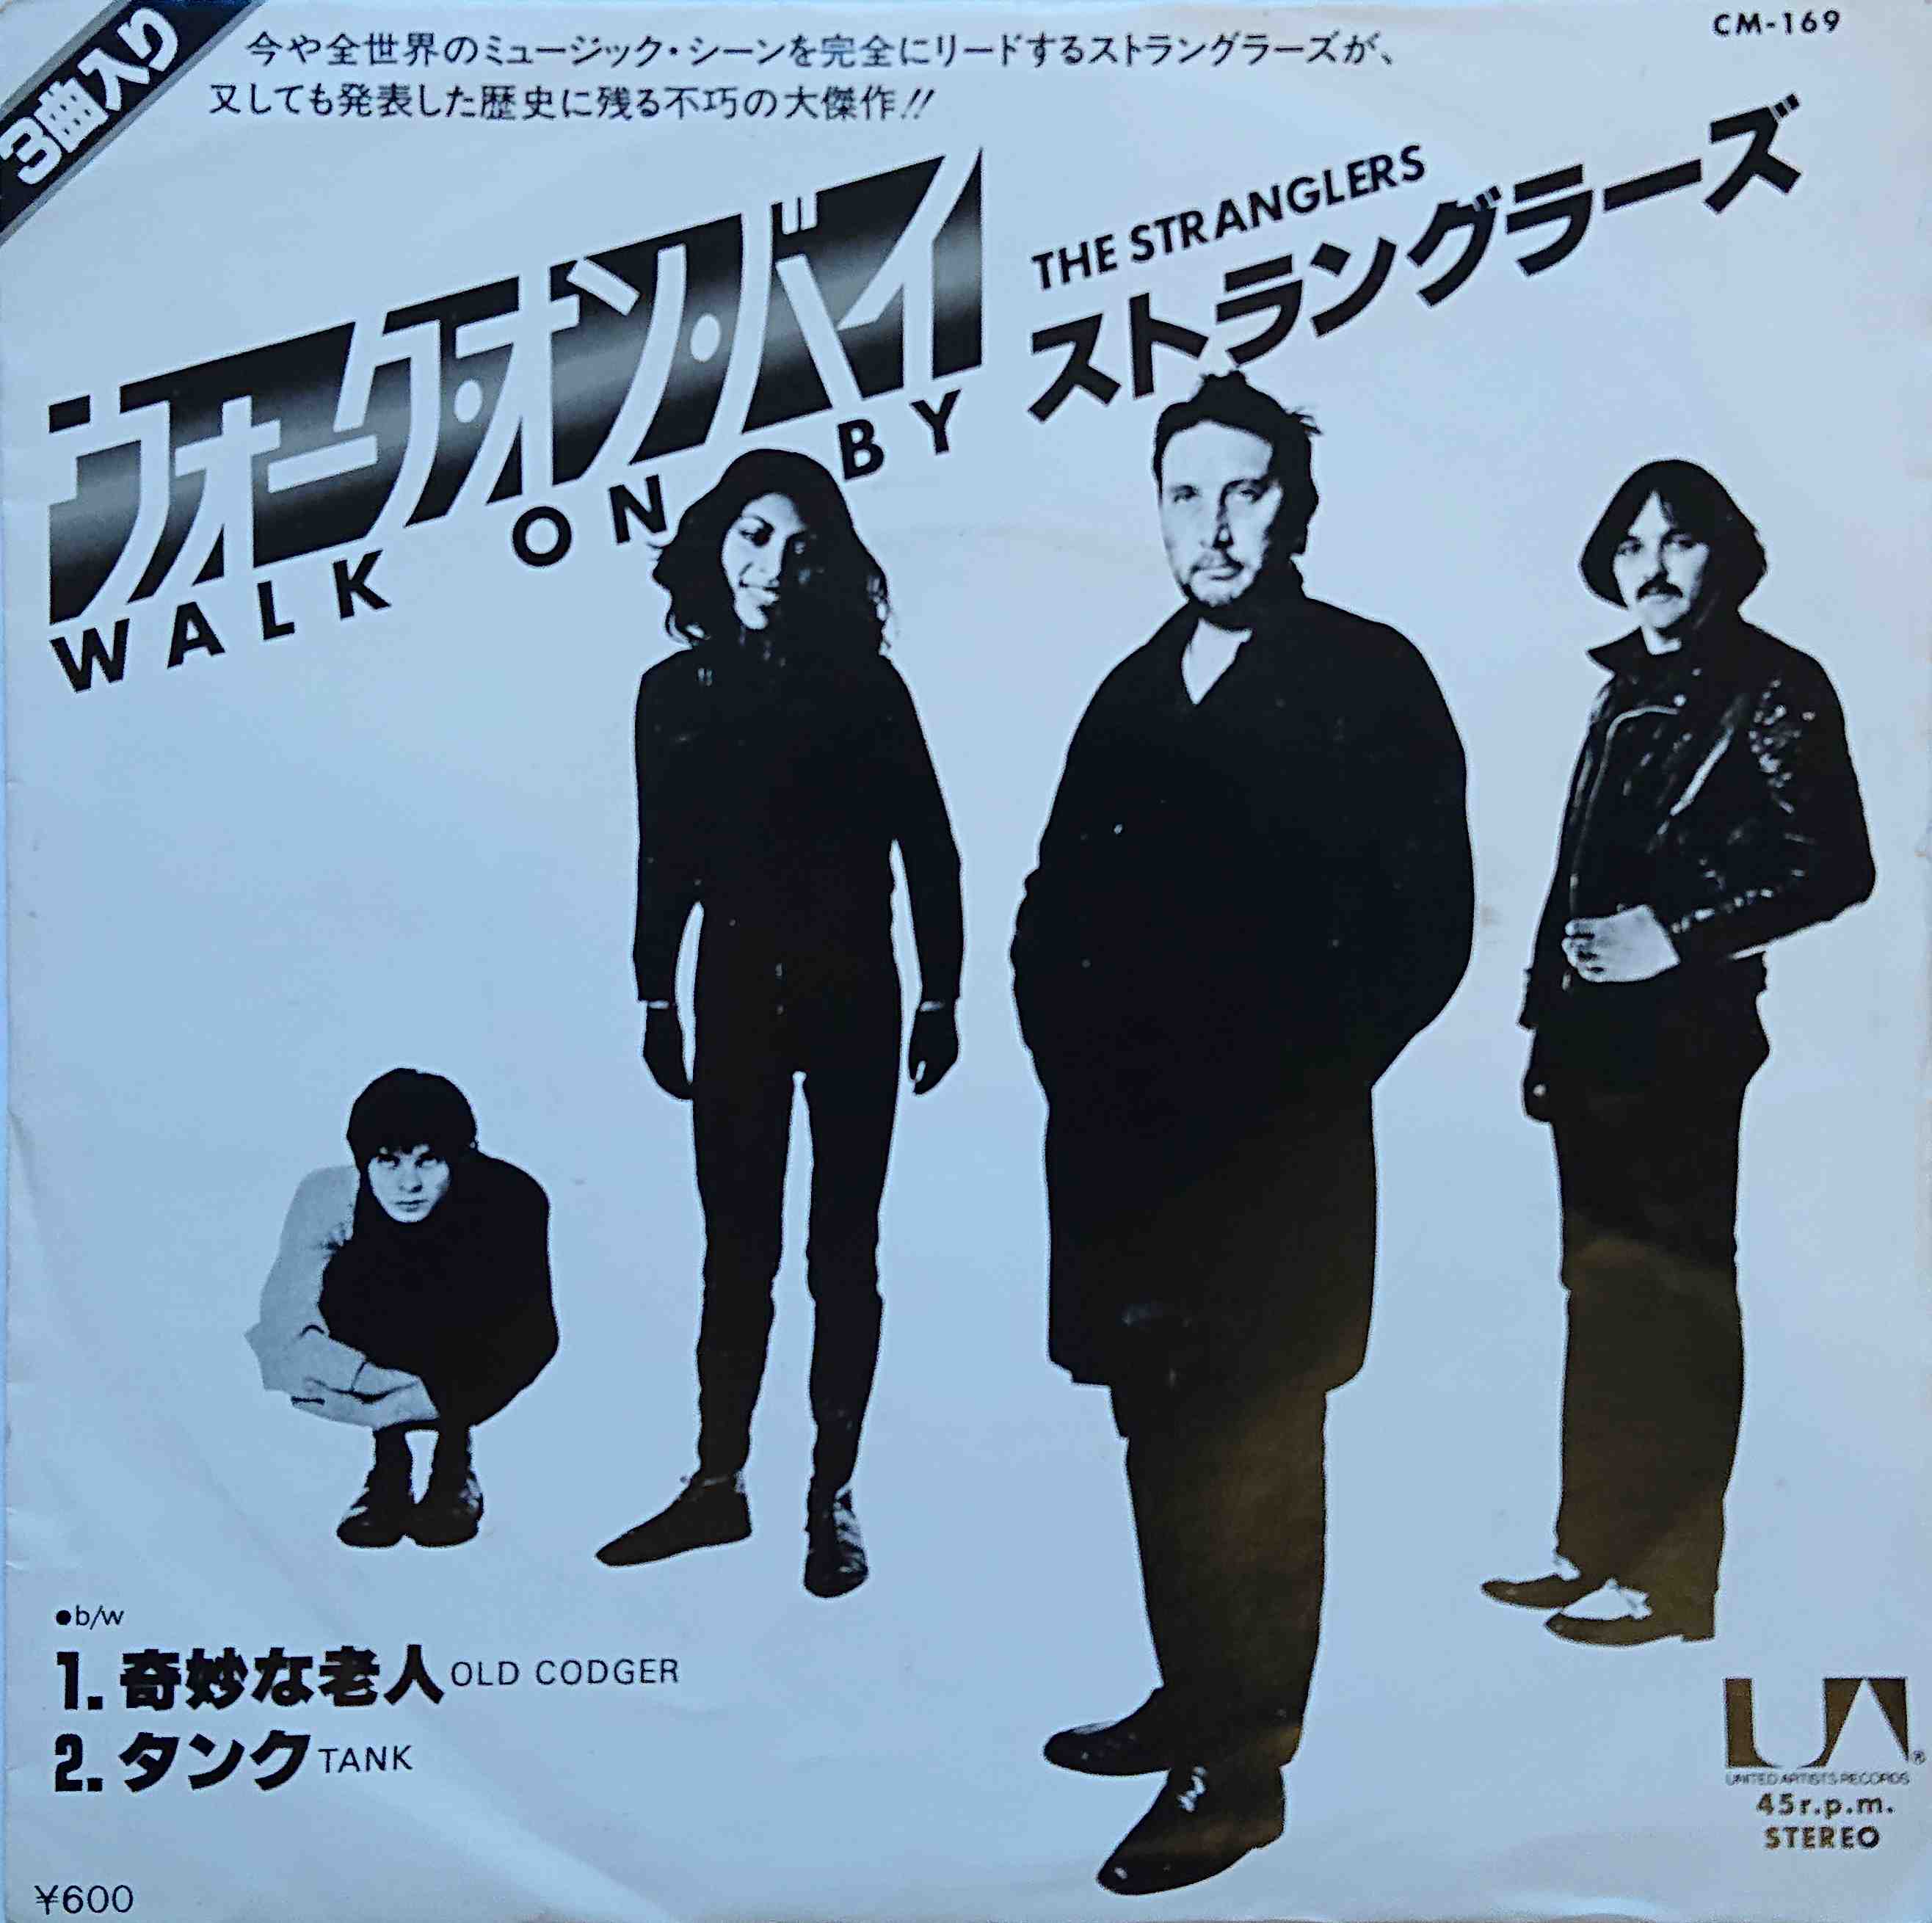 Picture of Walk on by by artist The Stranglers from The Stranglers singles